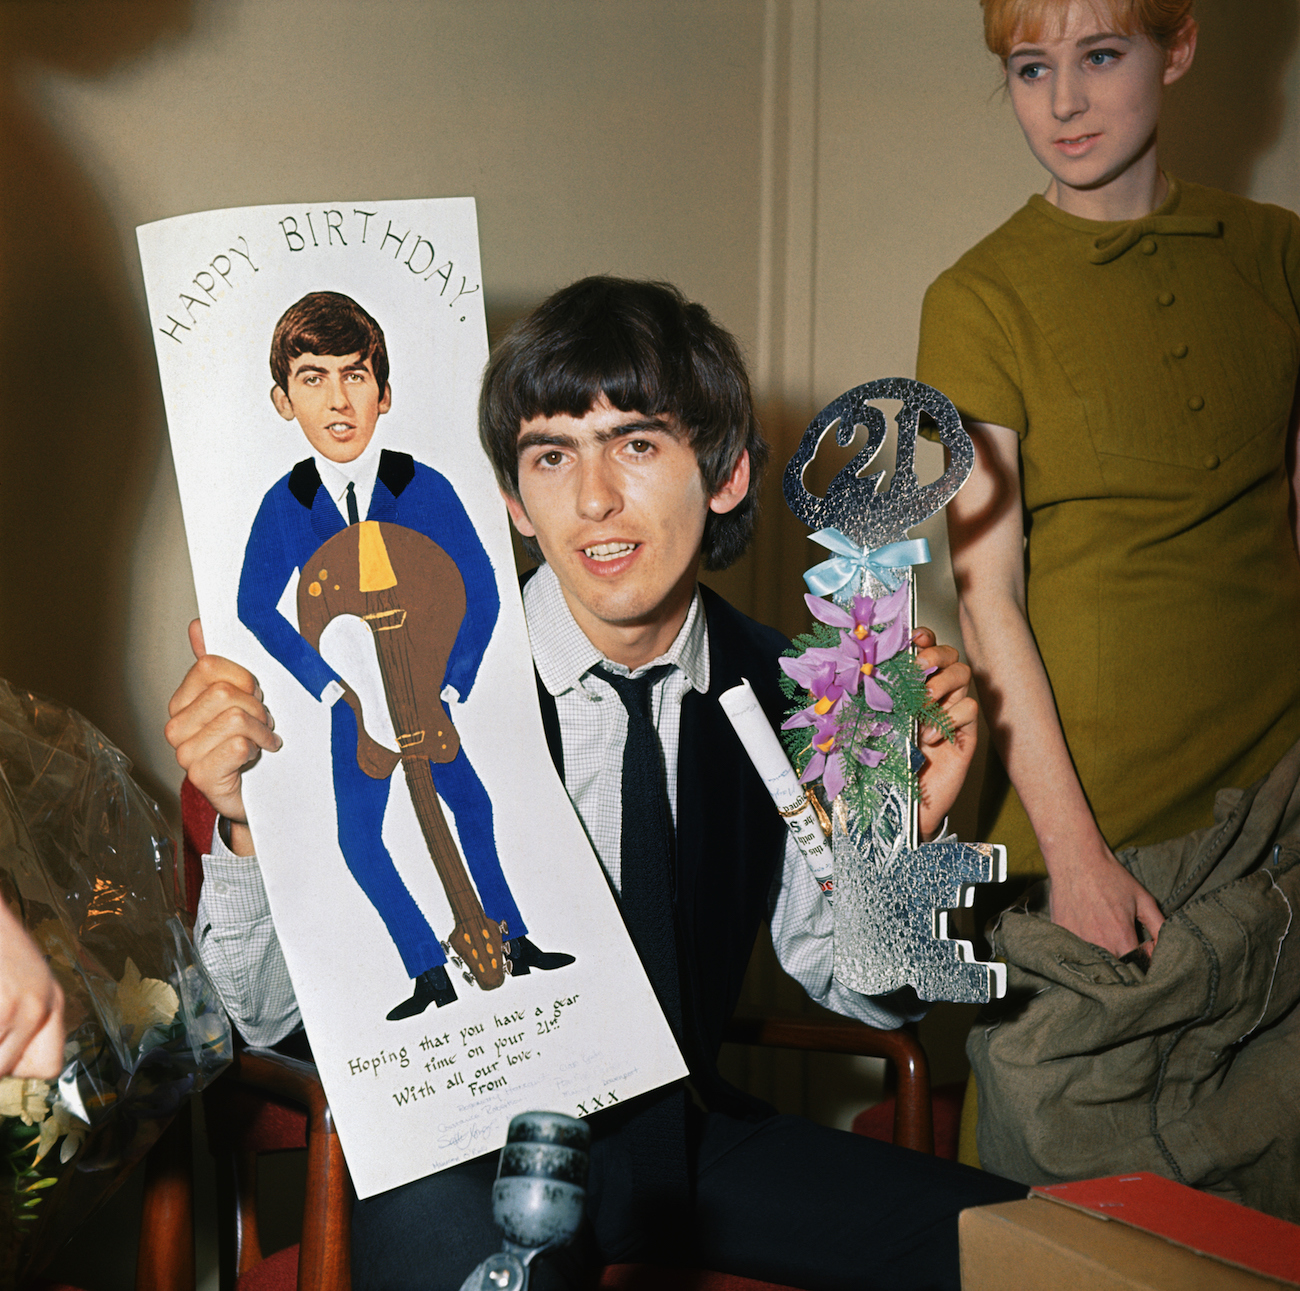 George Harrison holding up some of the birthday cards he received from fans for his 21st birthday in 1964.